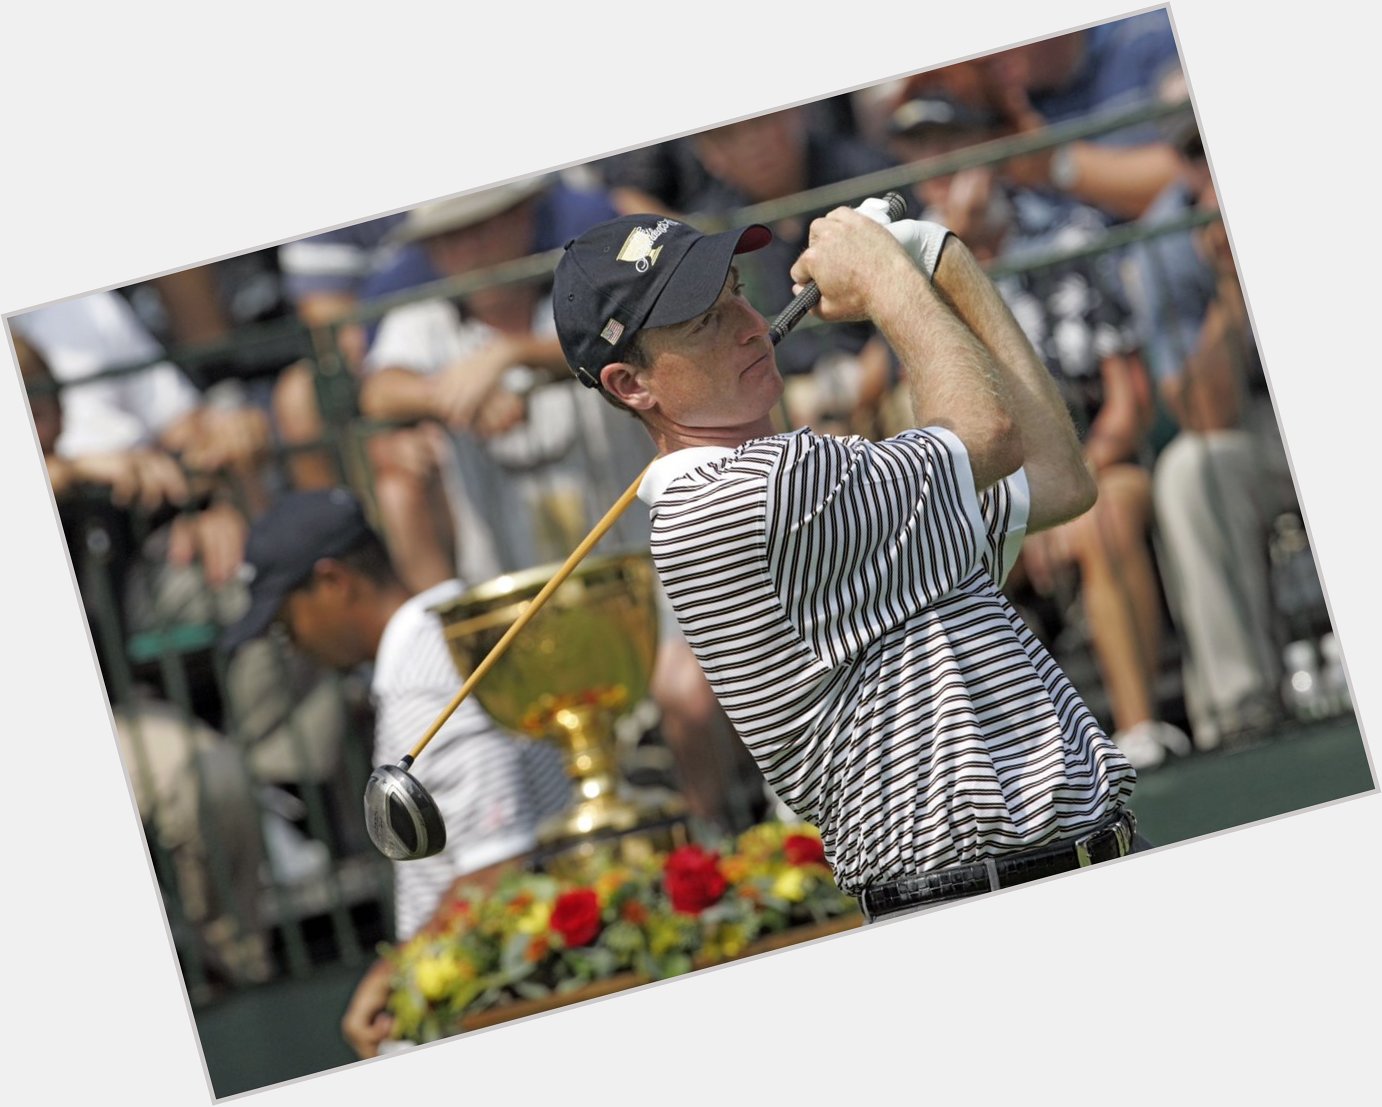 A very special happy birthday to & Captain\s Assistants, Jim Furyk & Mike Weir!  